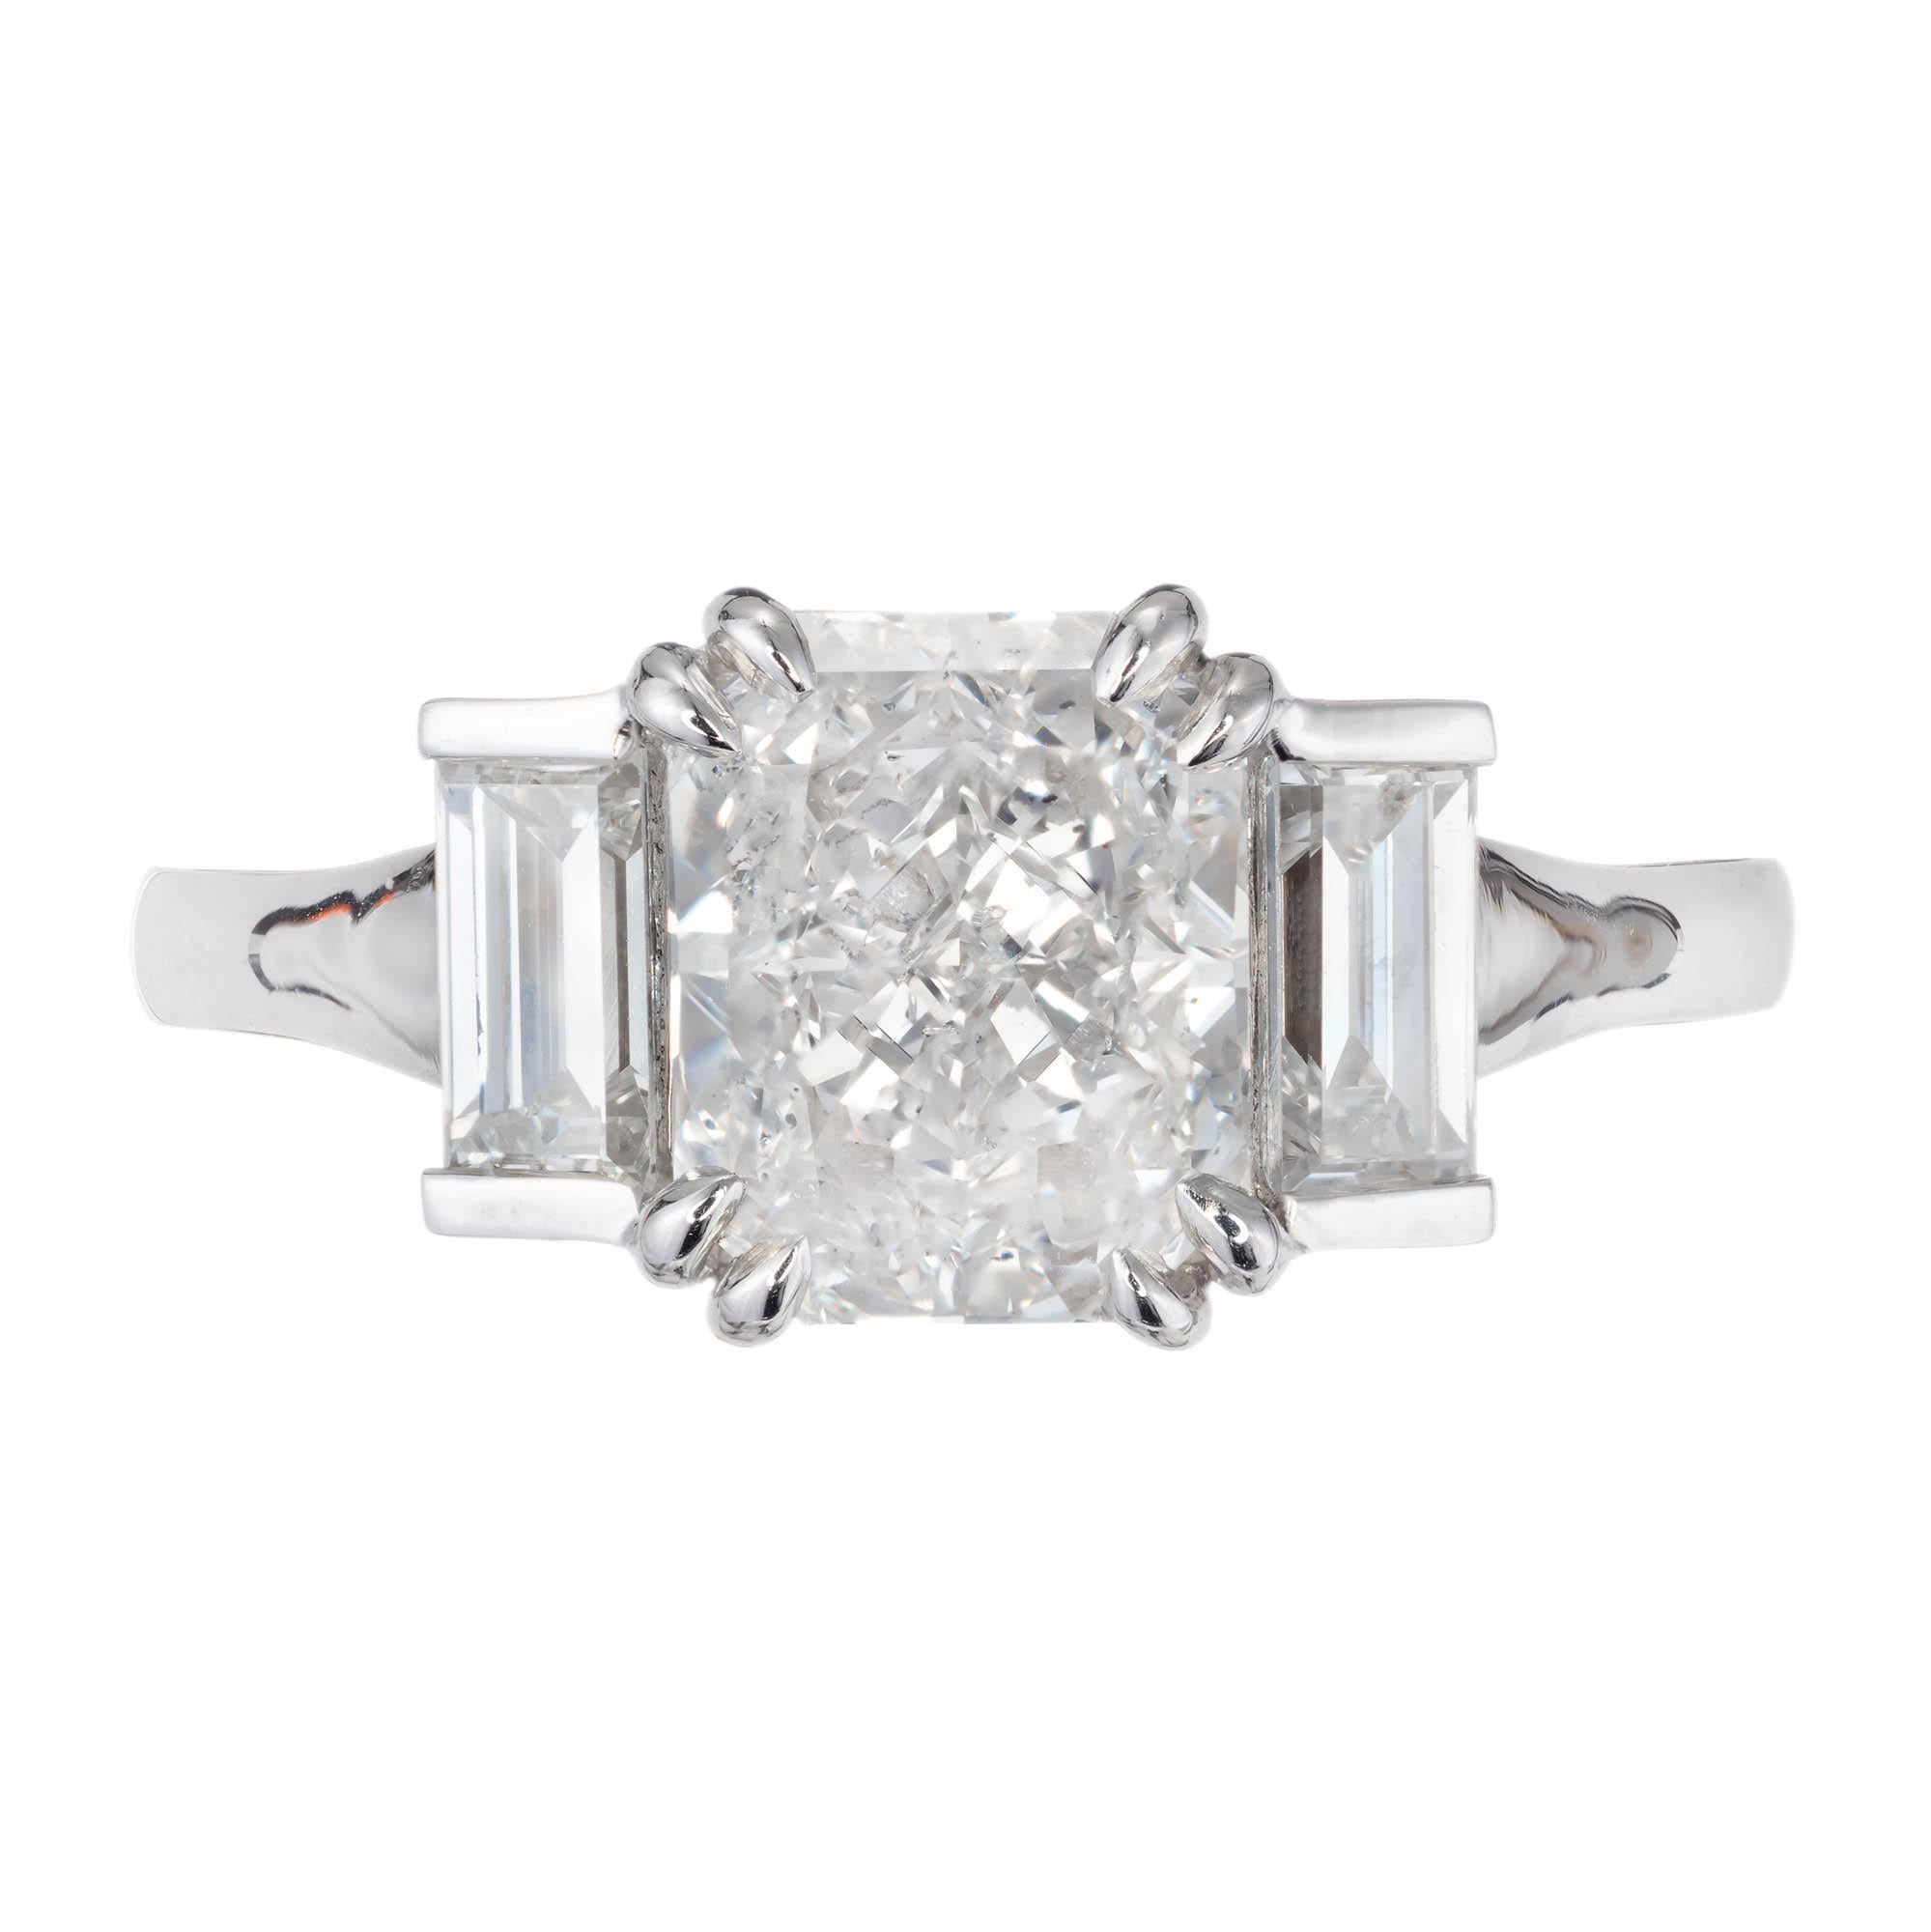 Peter Suchy Art Deco Inspired diamond engagement ring. 2.01 carat radiant cut center diamond certified by the GIA. Accented by two emerald cut side diamonds, in a platinum setting. 

1 cut cornered rectangular brilliant F I diamond, Approximate 2.01